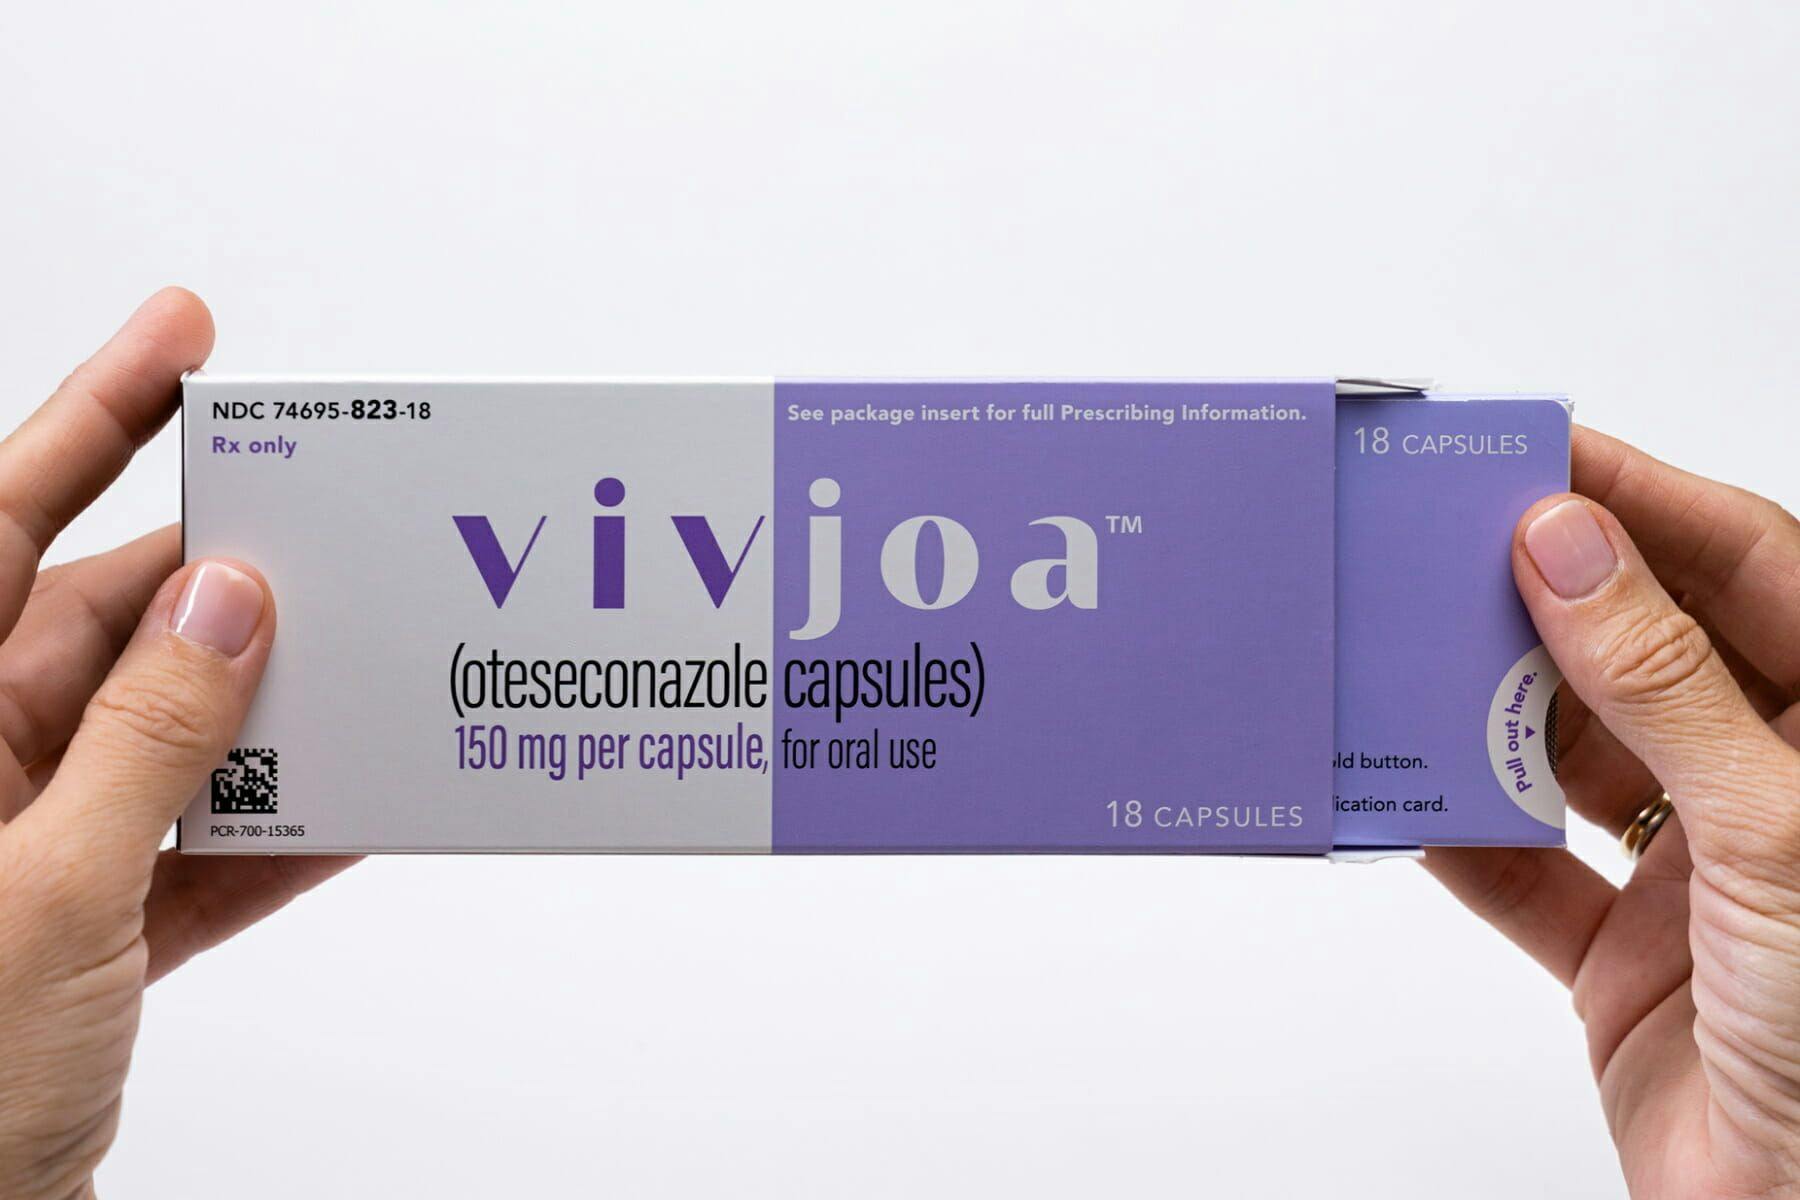 Mycovia Pharmaceuticals Launches Vivjoa for Chronic Yeast Infections